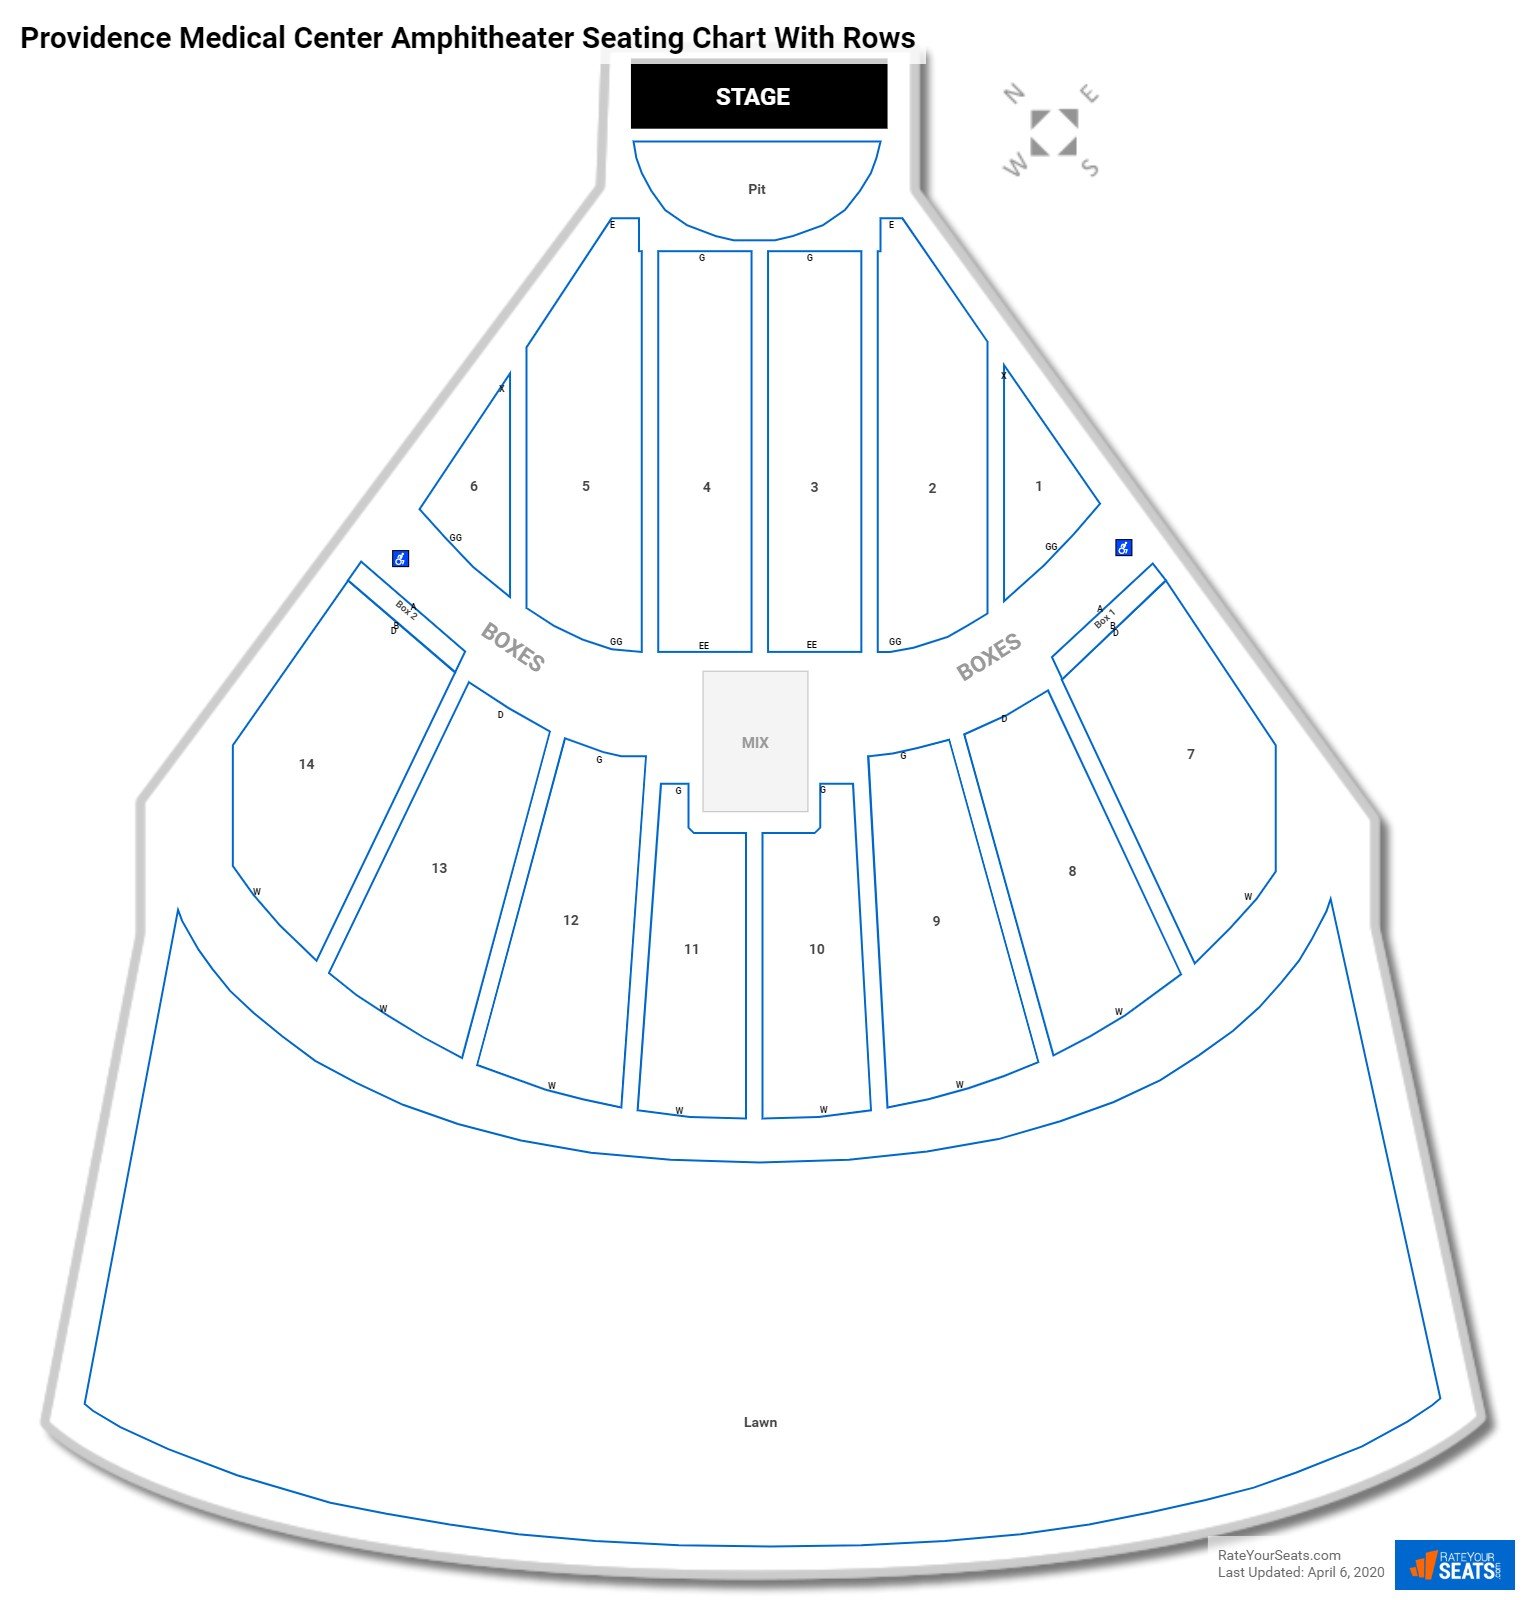 Orion Amphitheater Seating Chart Rows